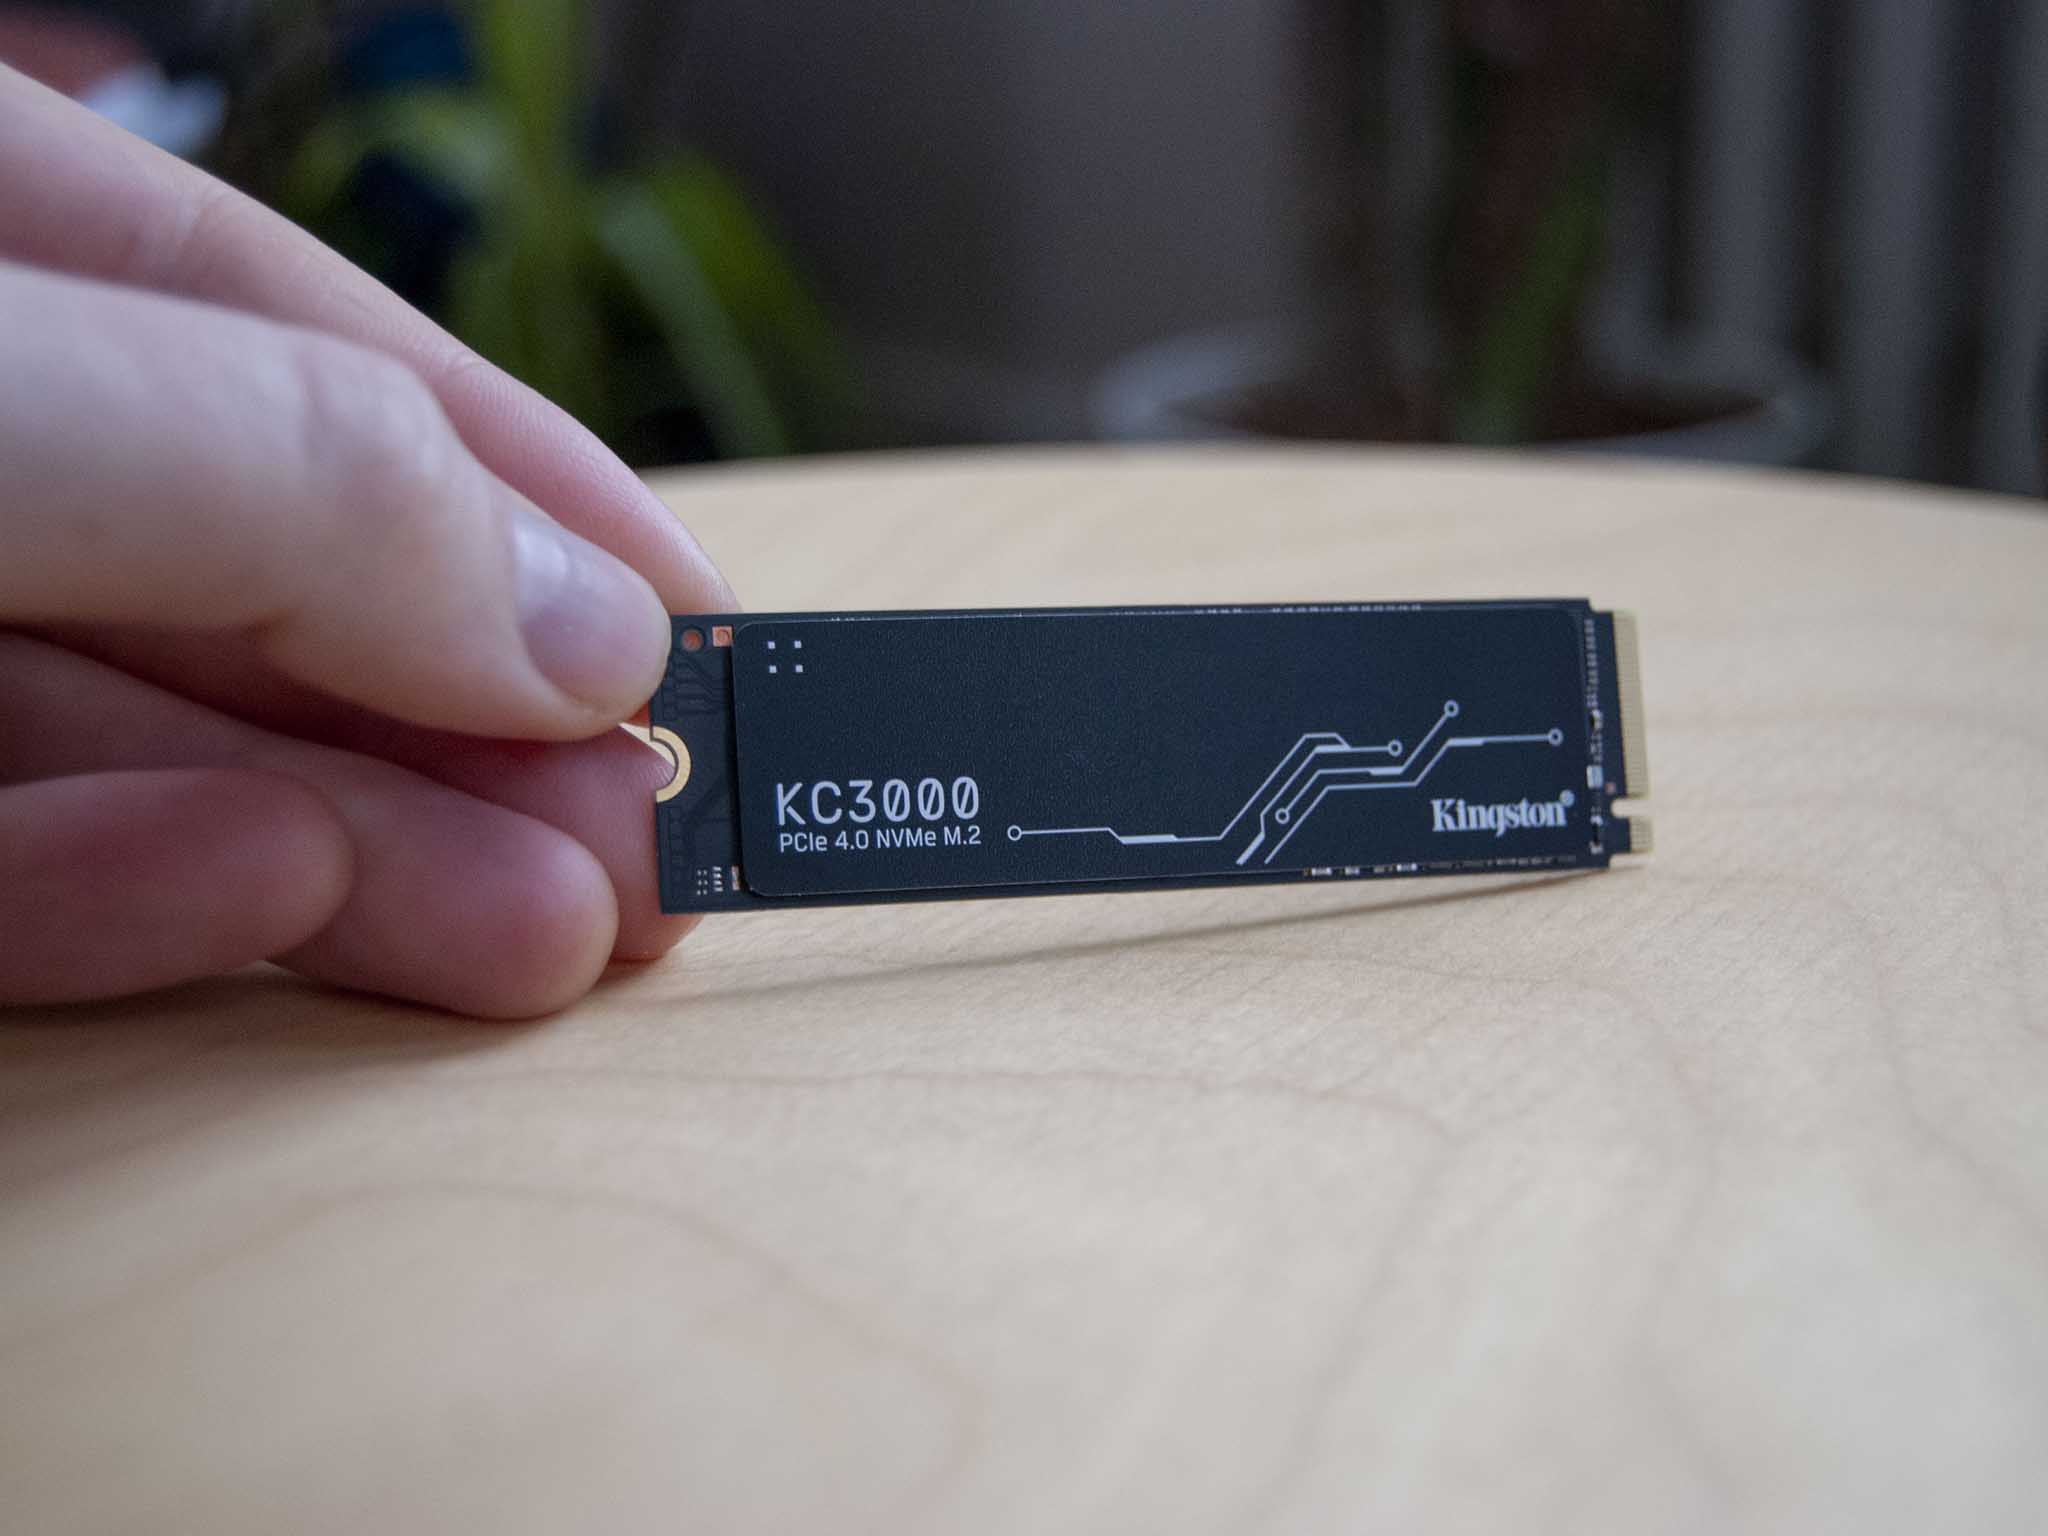 KC3000 One of the fastest, most durable PCIe 4.0 SSDs we've tested | Windows Central